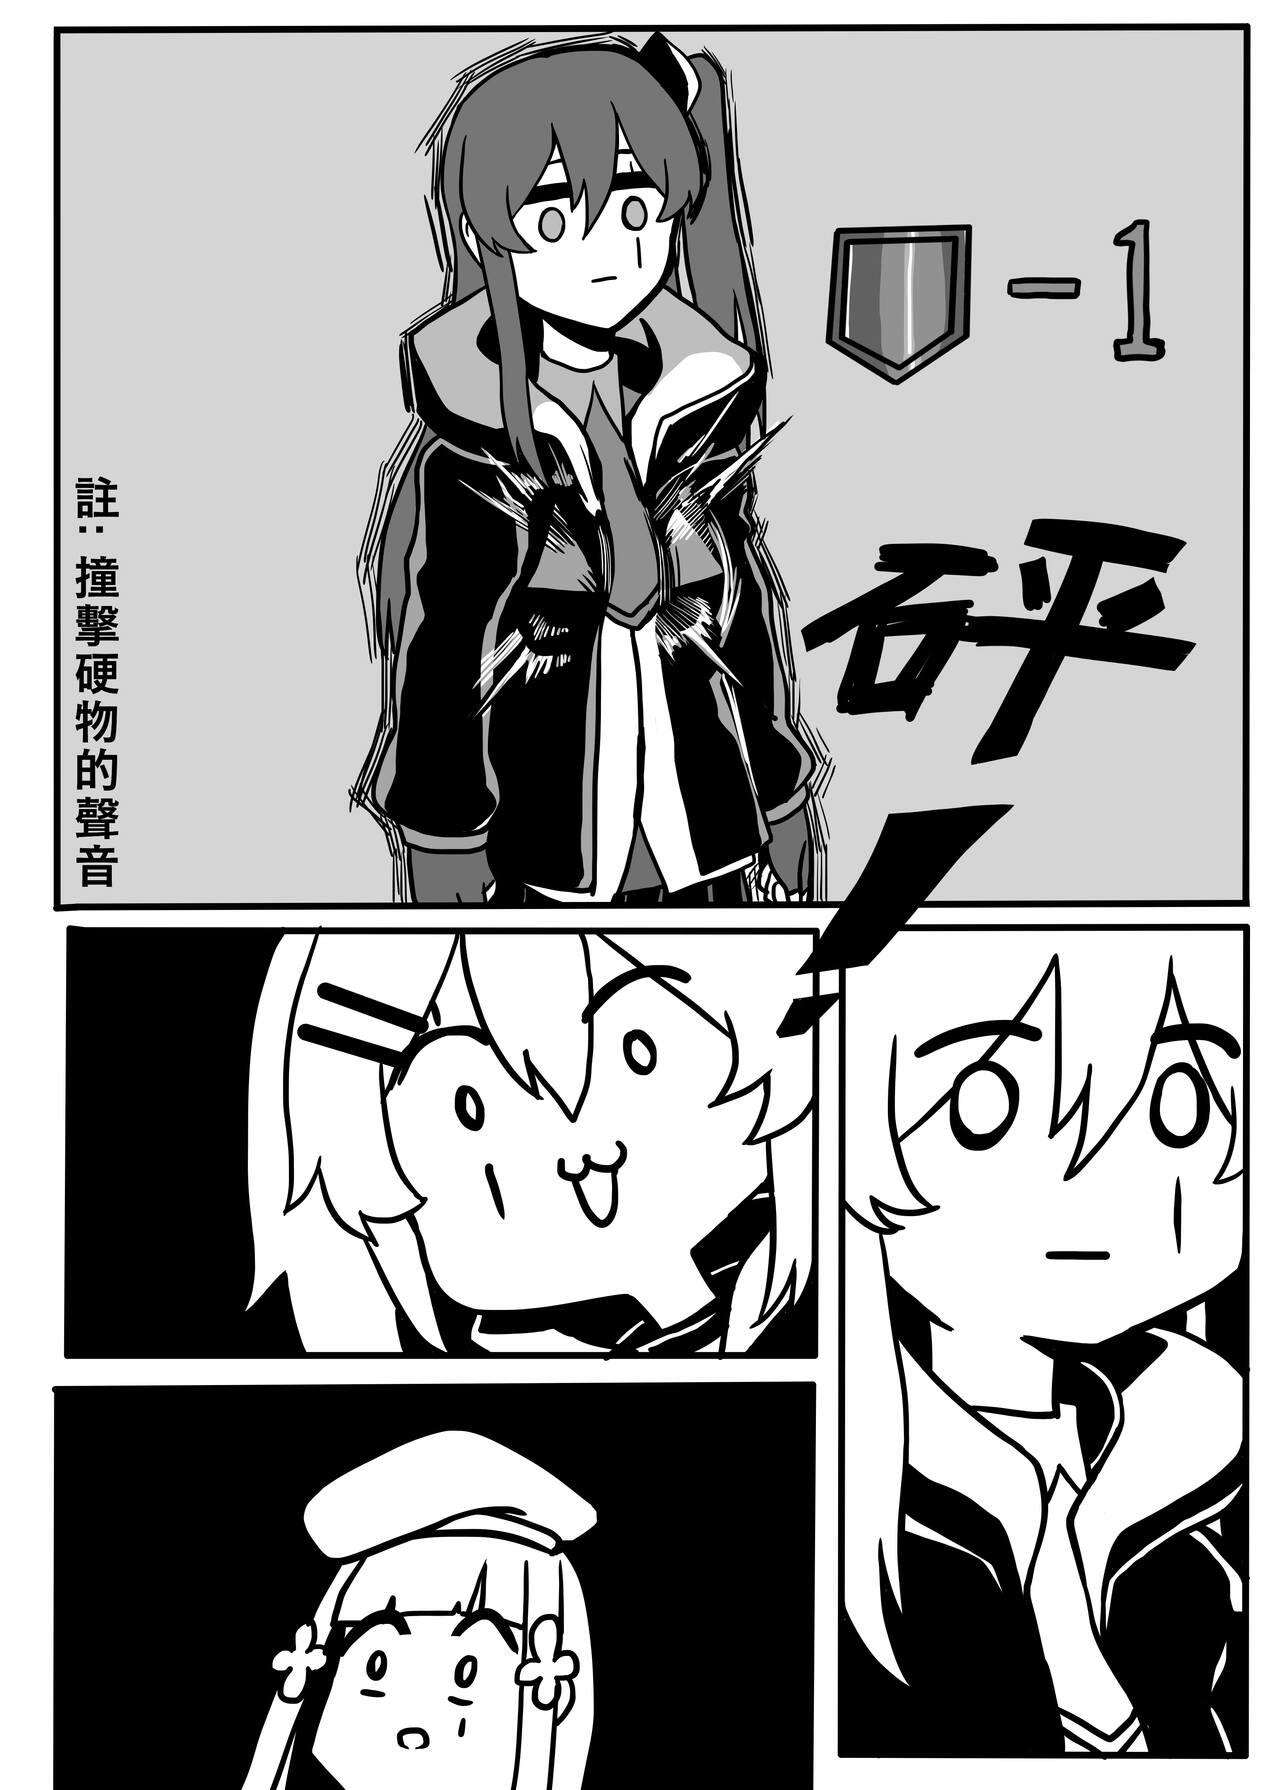 Hood 格理芬的異形戰場 - Girls frontline Pinay - Page 6